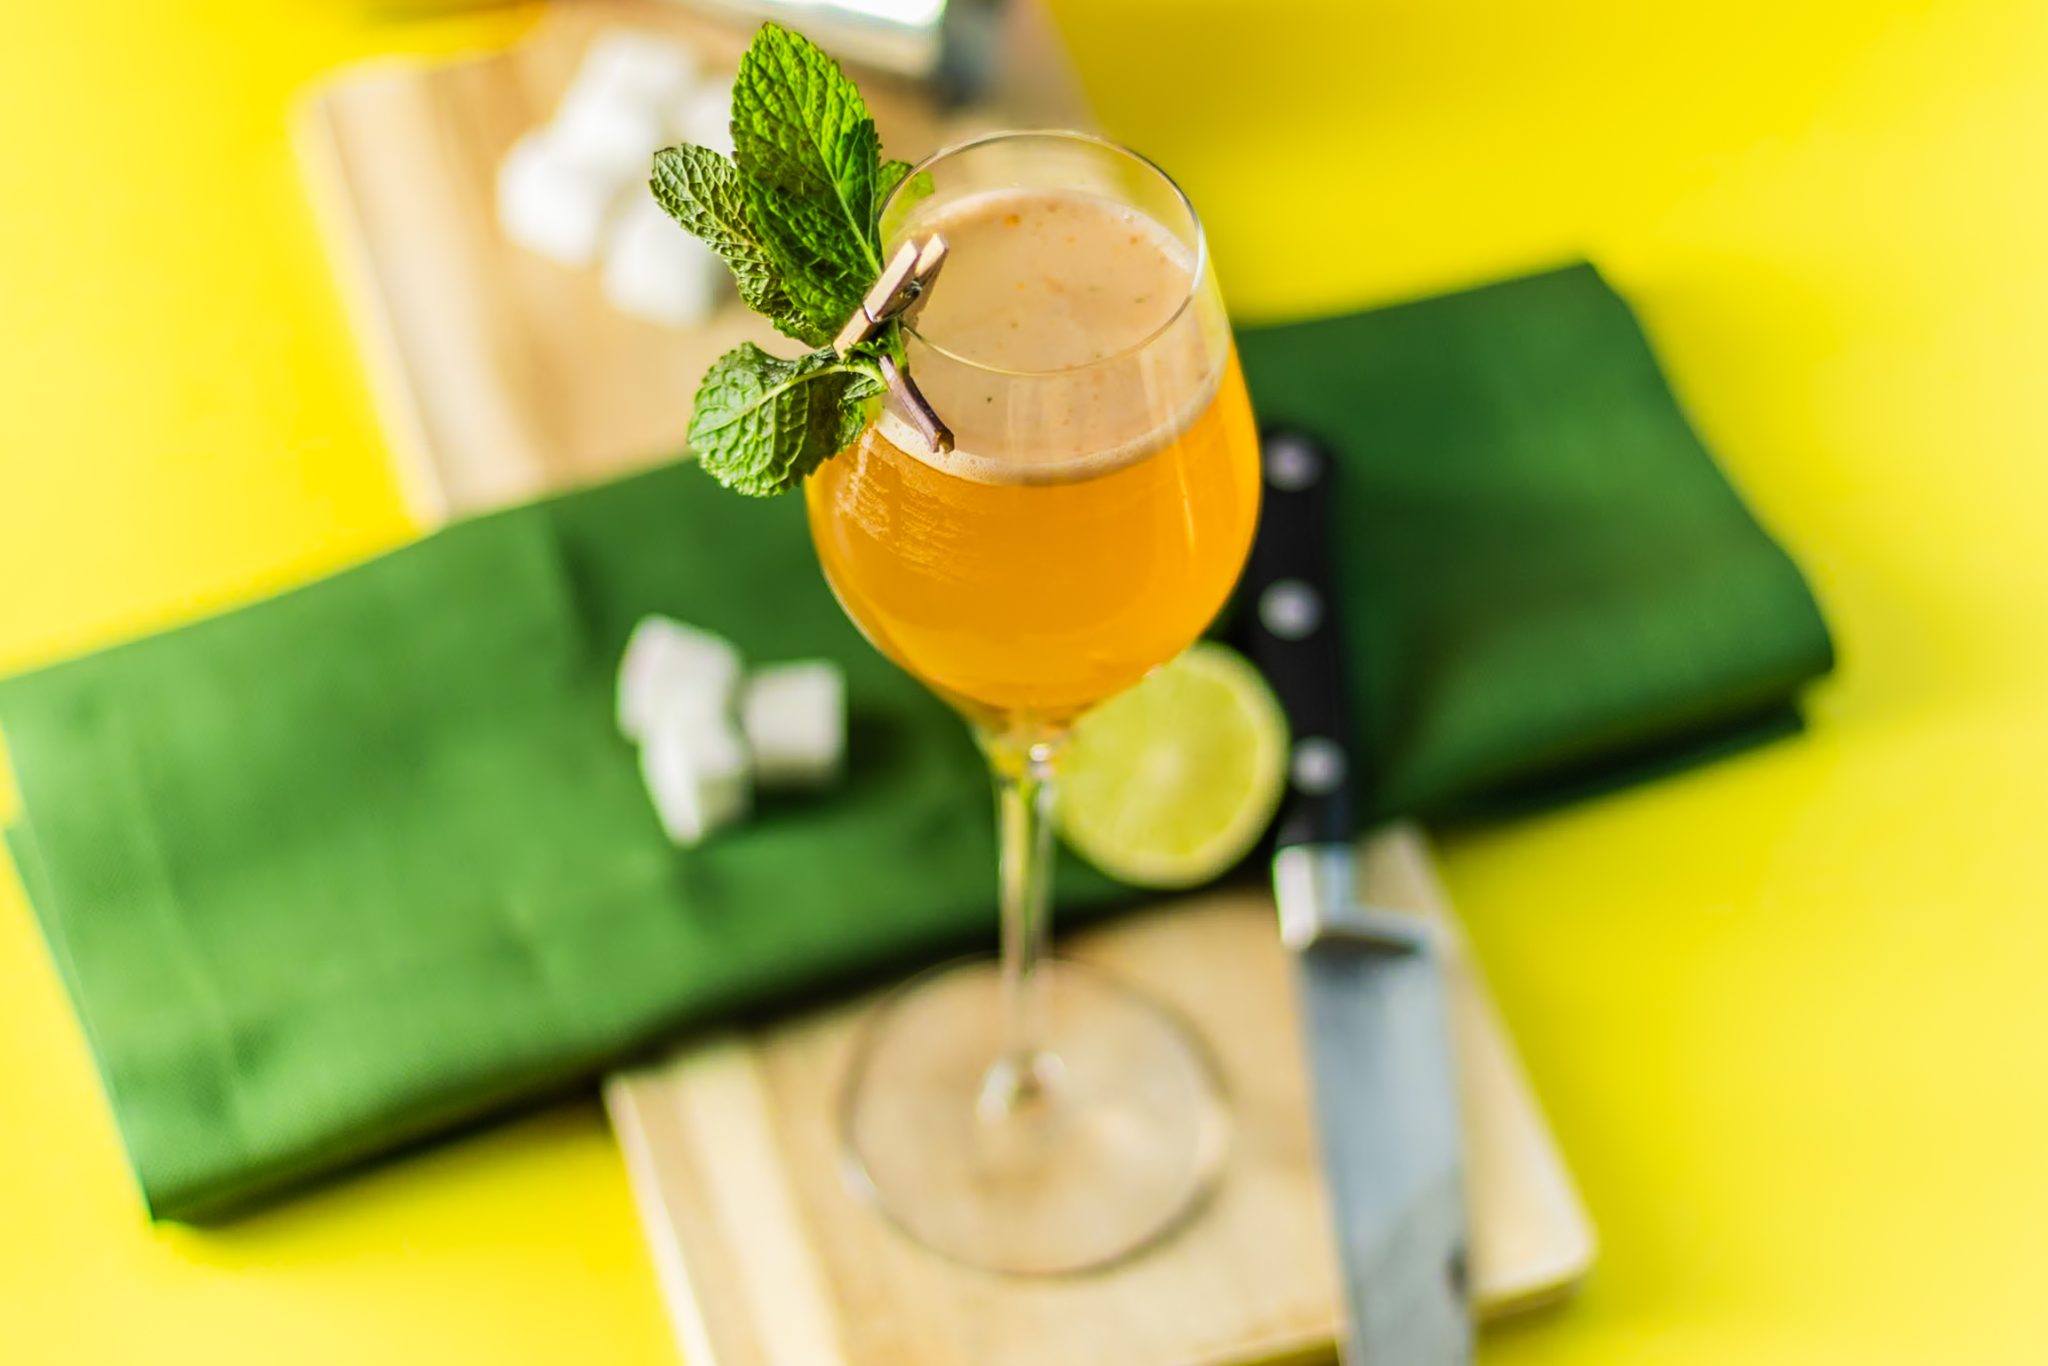 An Old Cuban cocktail, shot from above, in a campagne glass on a wooden board placed on a yellow table surrounded by a knife, a lime, sugar cubes, and a green cloth.